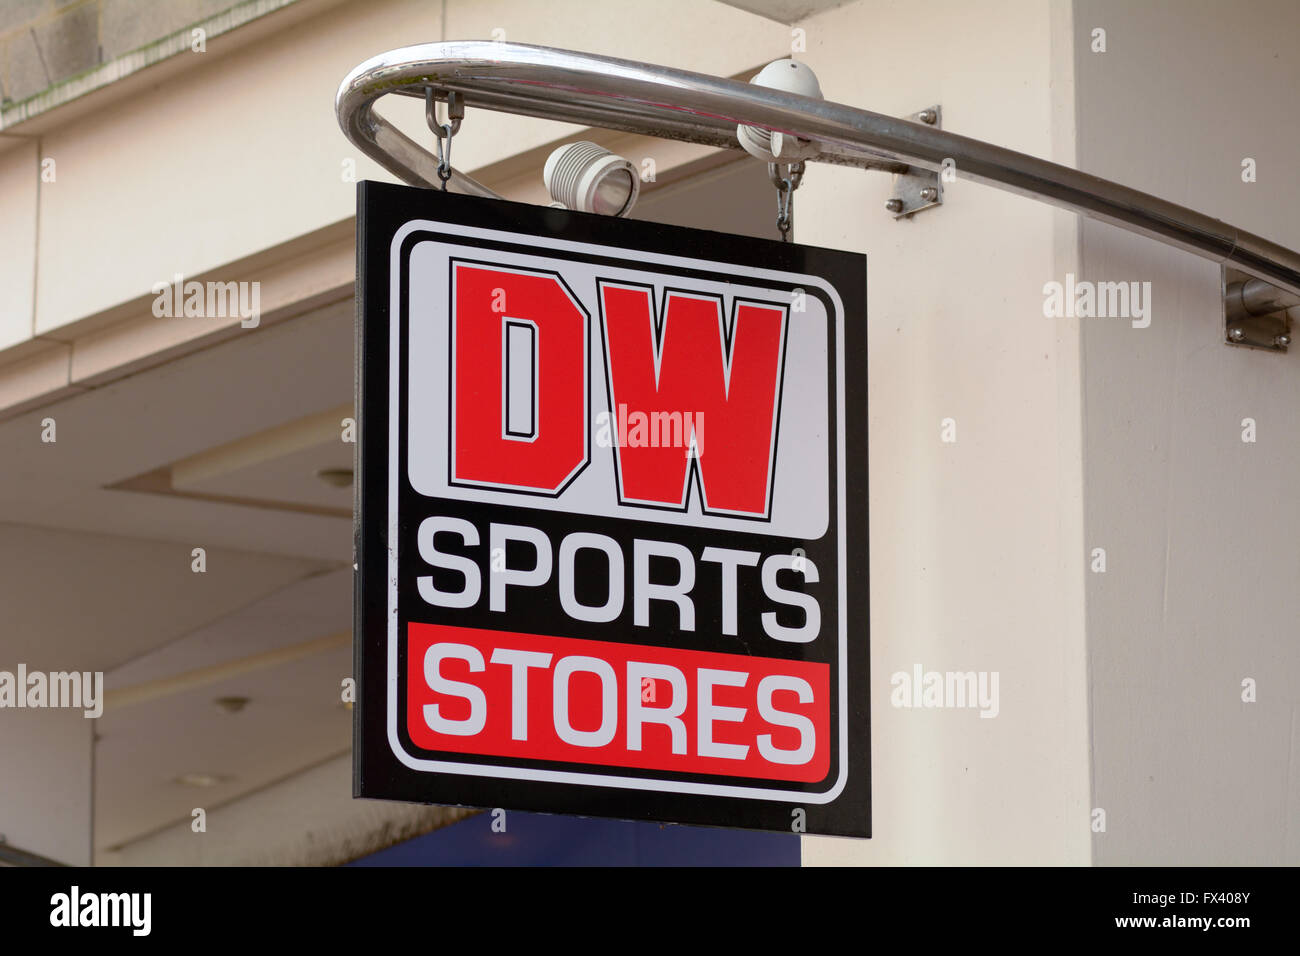 DW Sports Stores sign outside shop Stock Photo